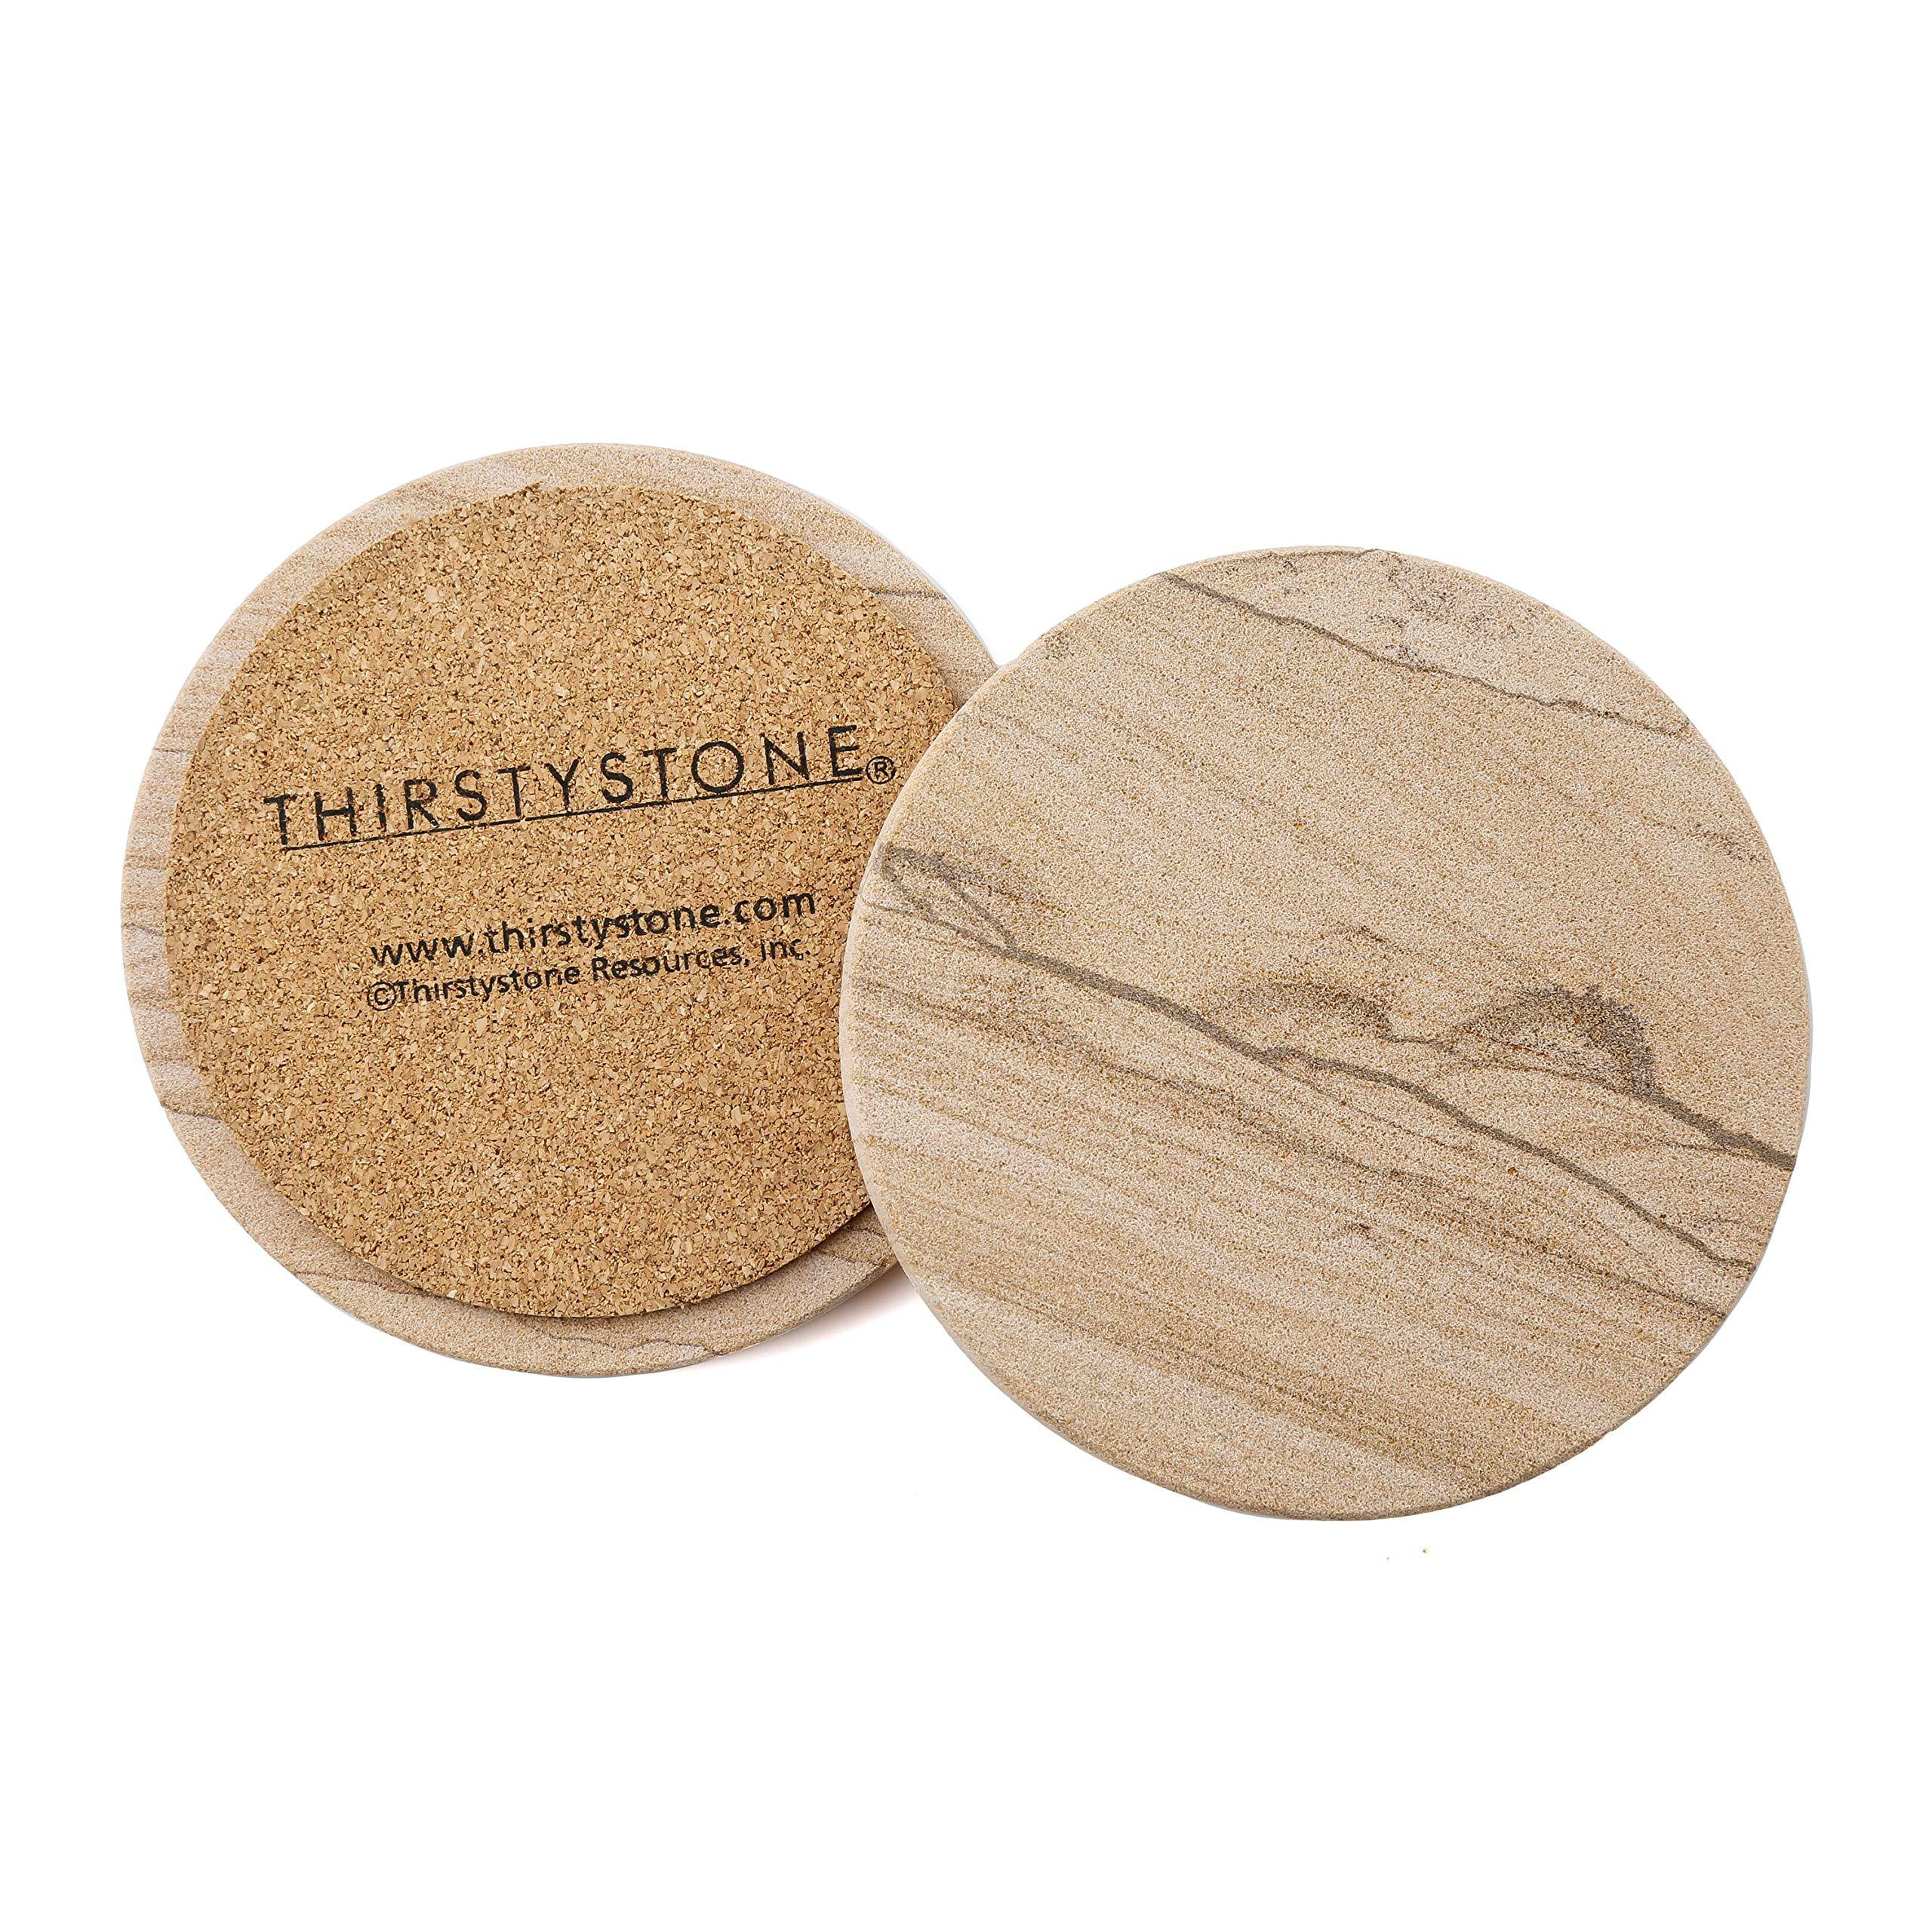 Leopard Print Thirstystone Drink Coasters Set with Metal Holder